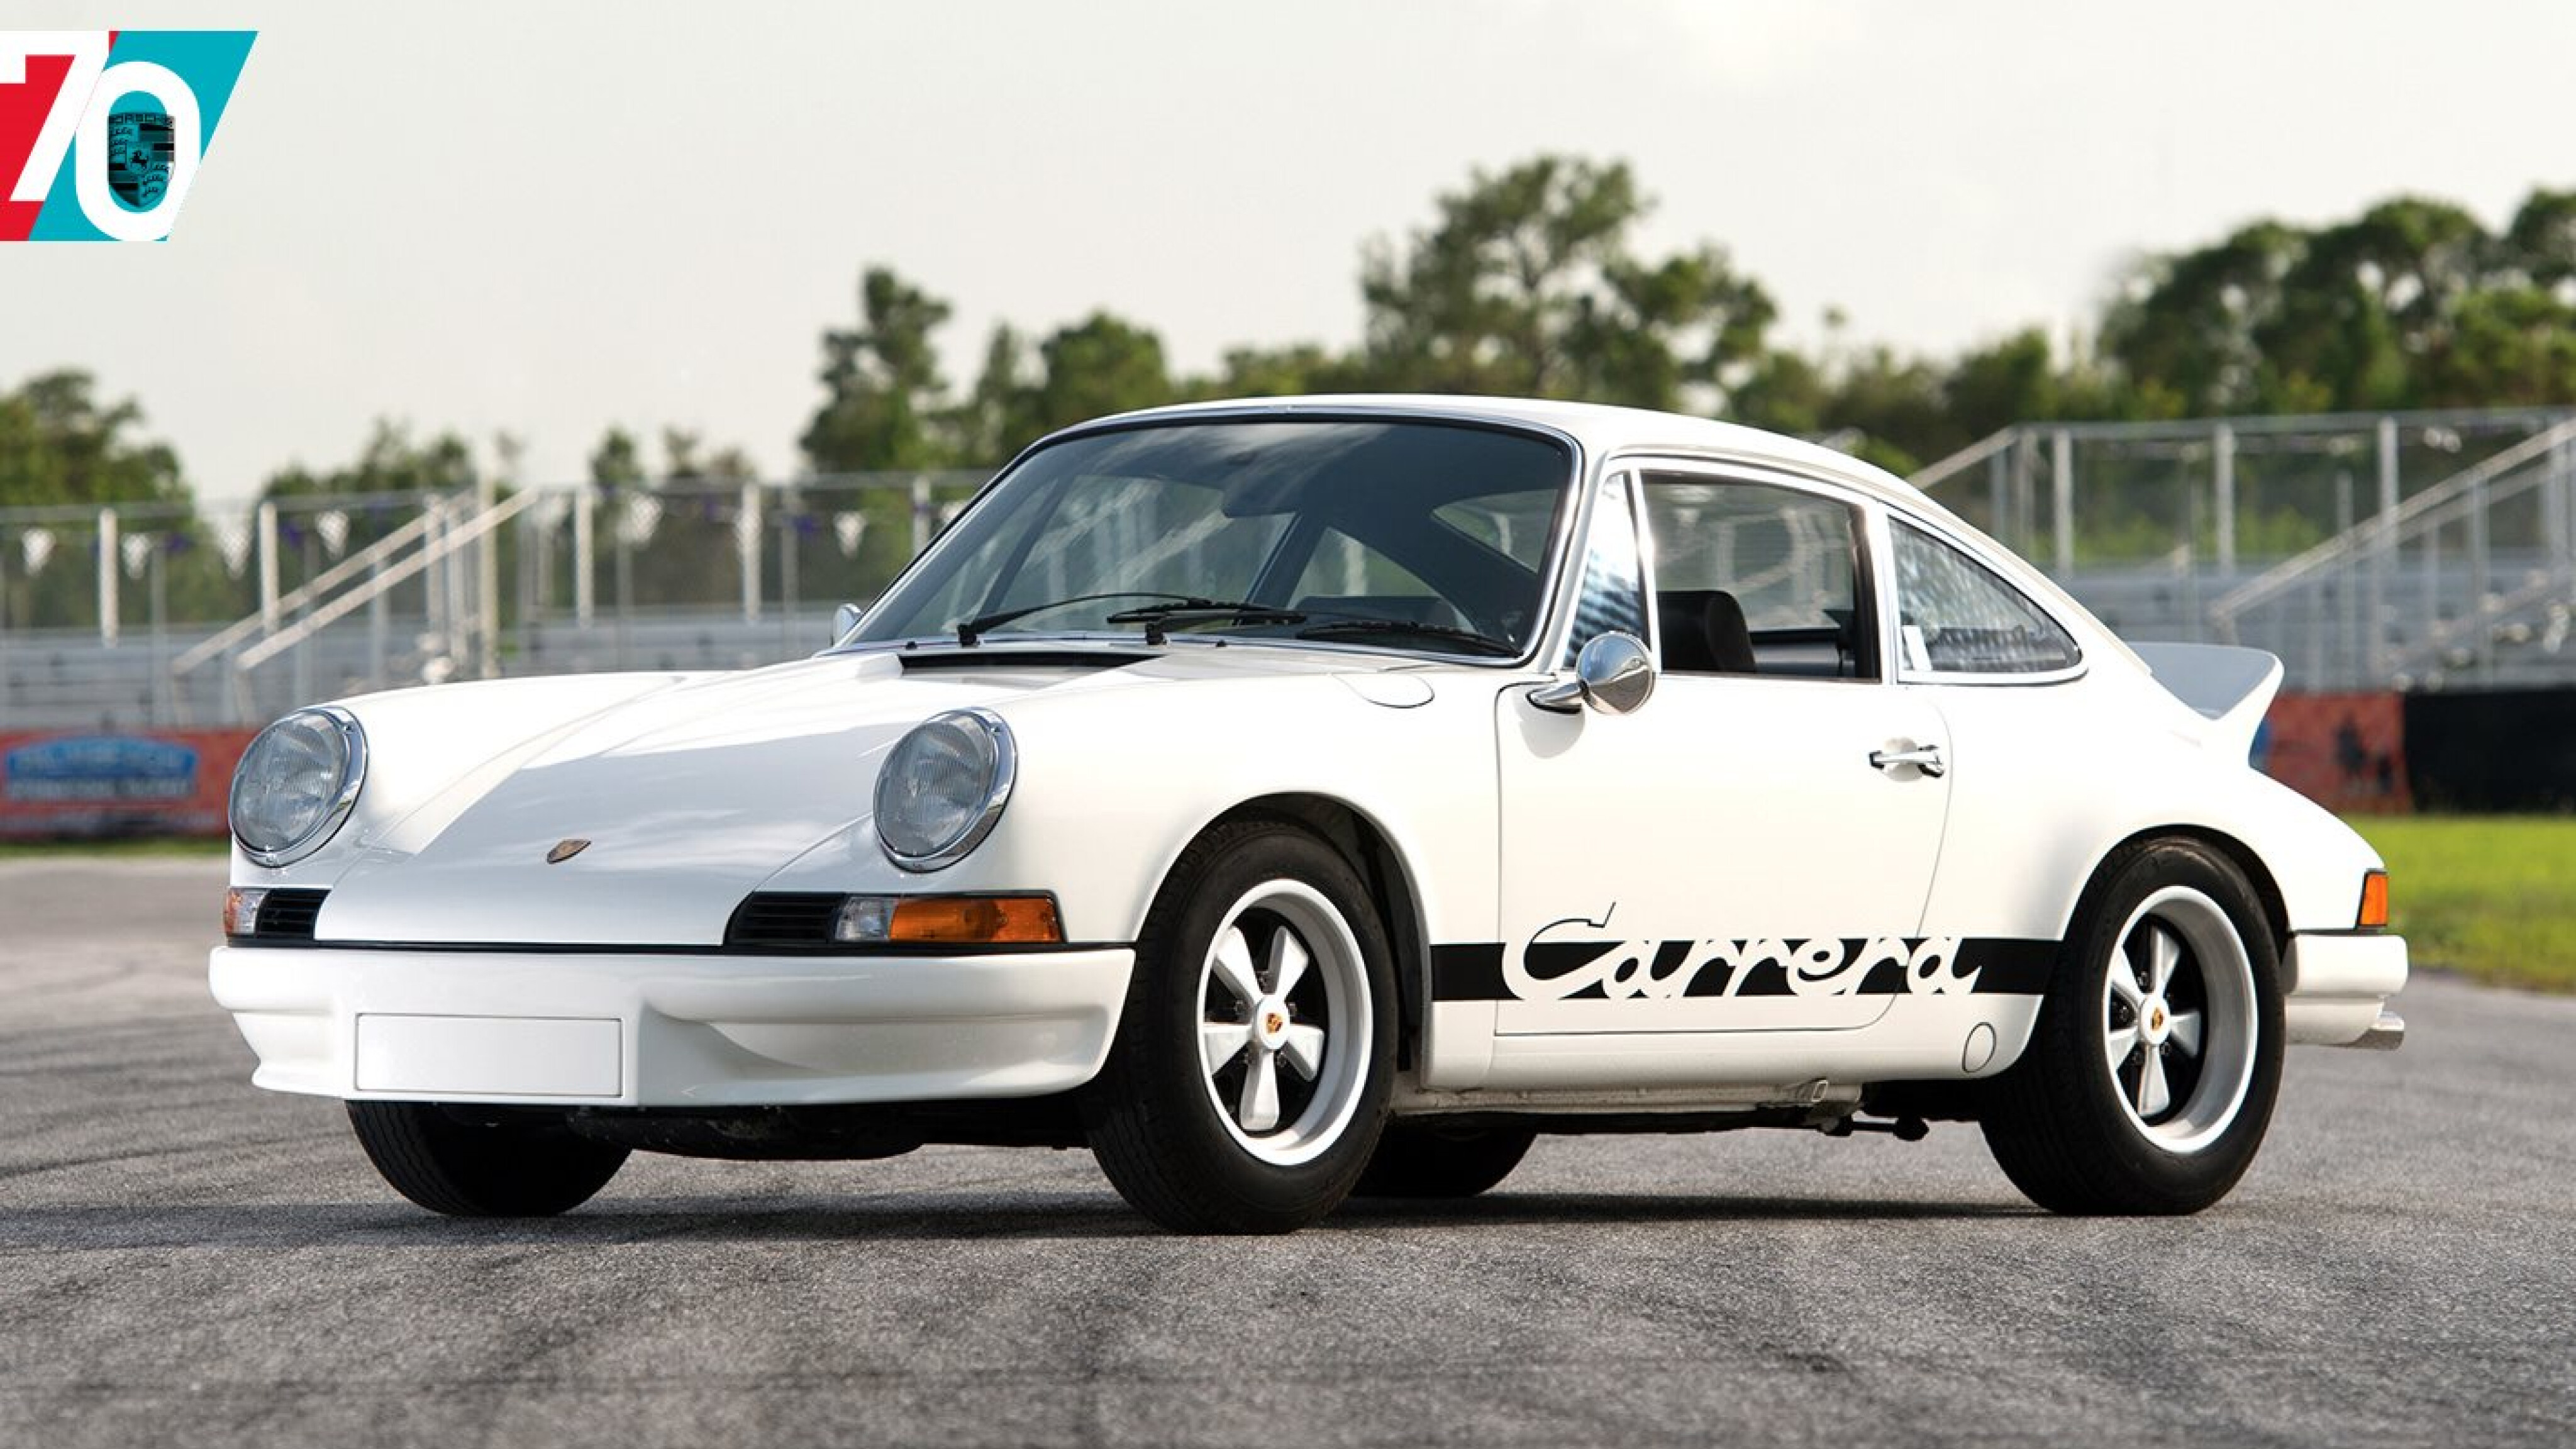 From zero to 1,000,000: Seven generations of the Porsche 911